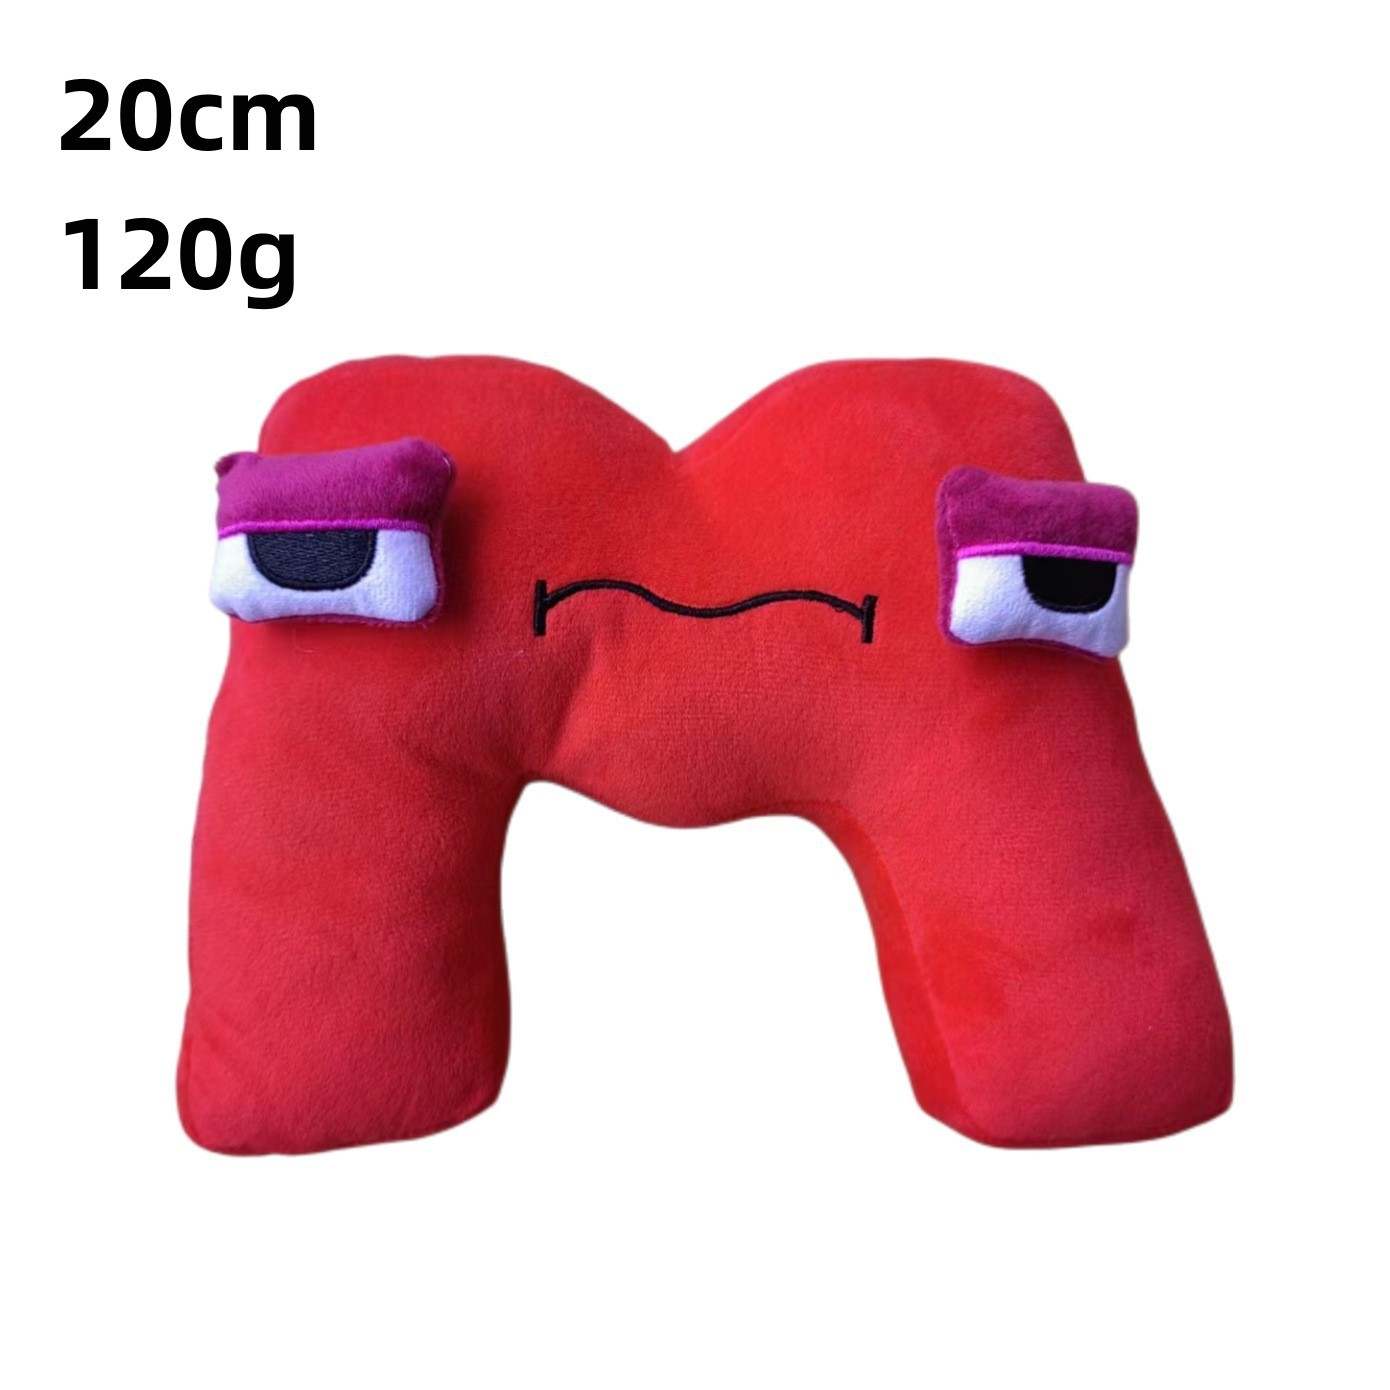 20cm Alphabet Lore Letter Legends Alphabet Lore Plush Toys Wholesale From  Manufacturers For Childrens Education And Learning From Flowery888, $2.16